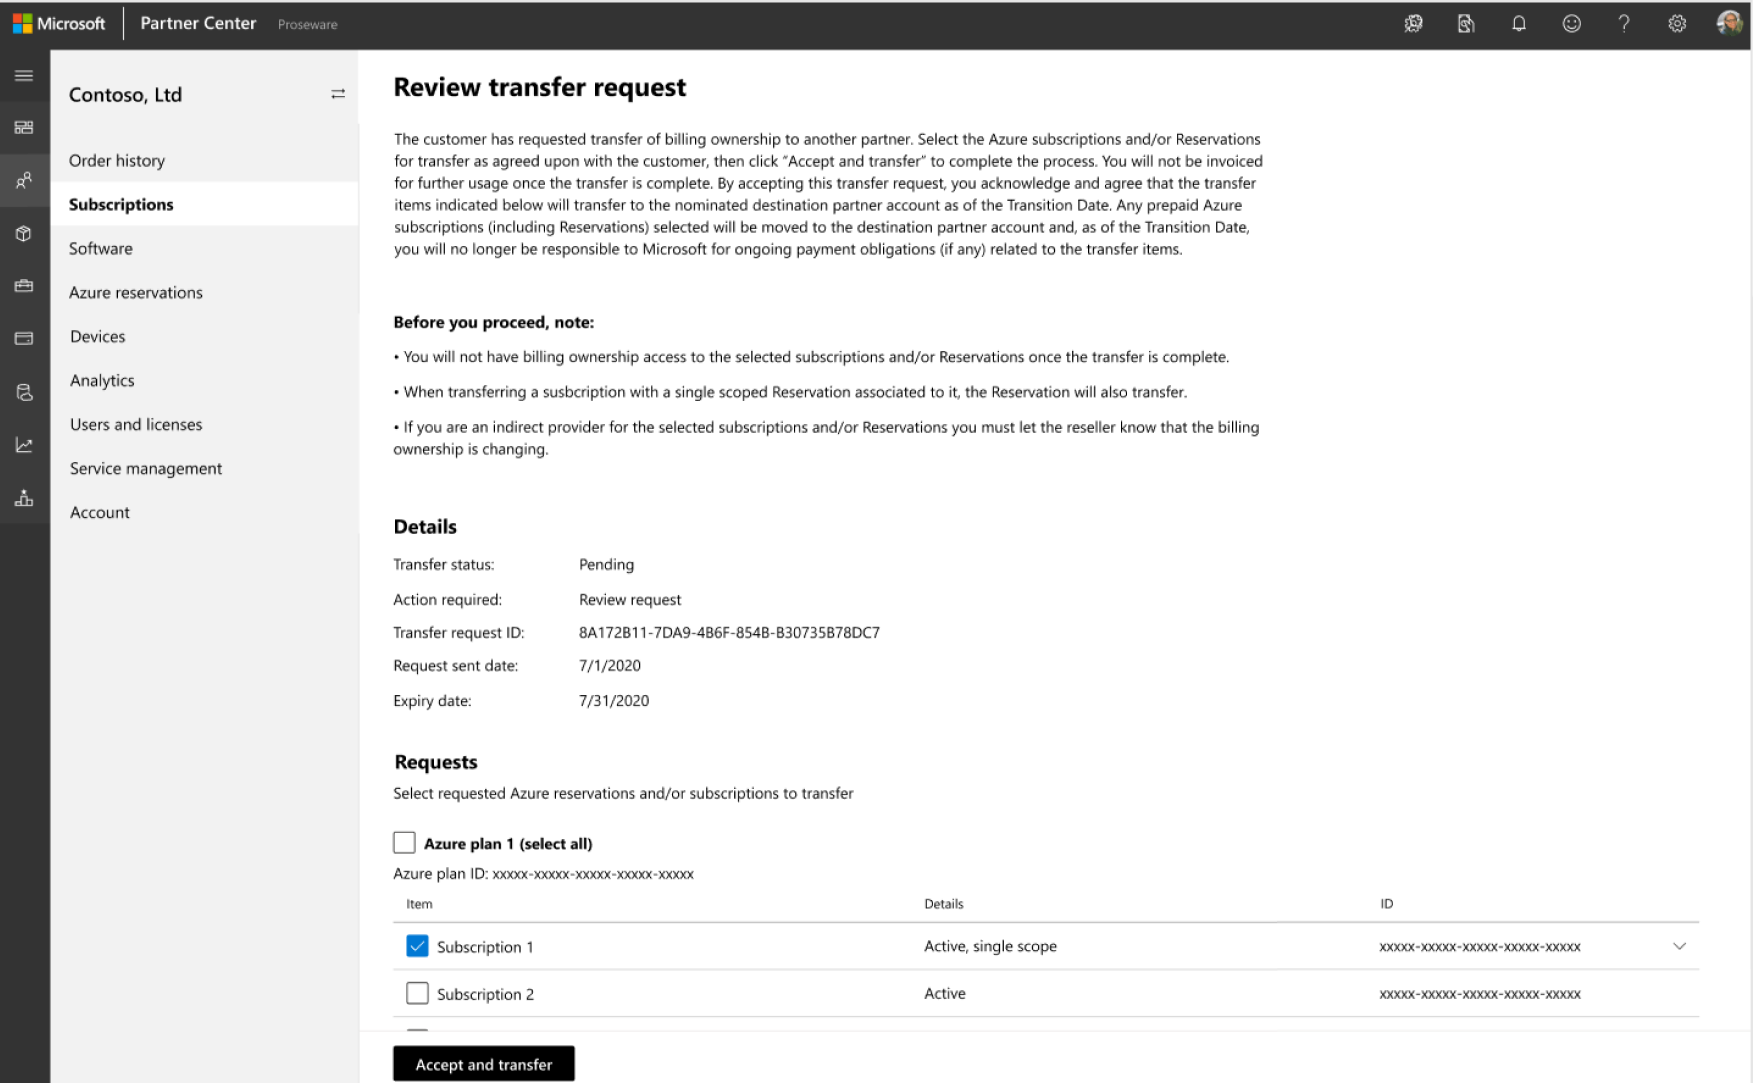 Screenshot that shows the Review transfer request screen.